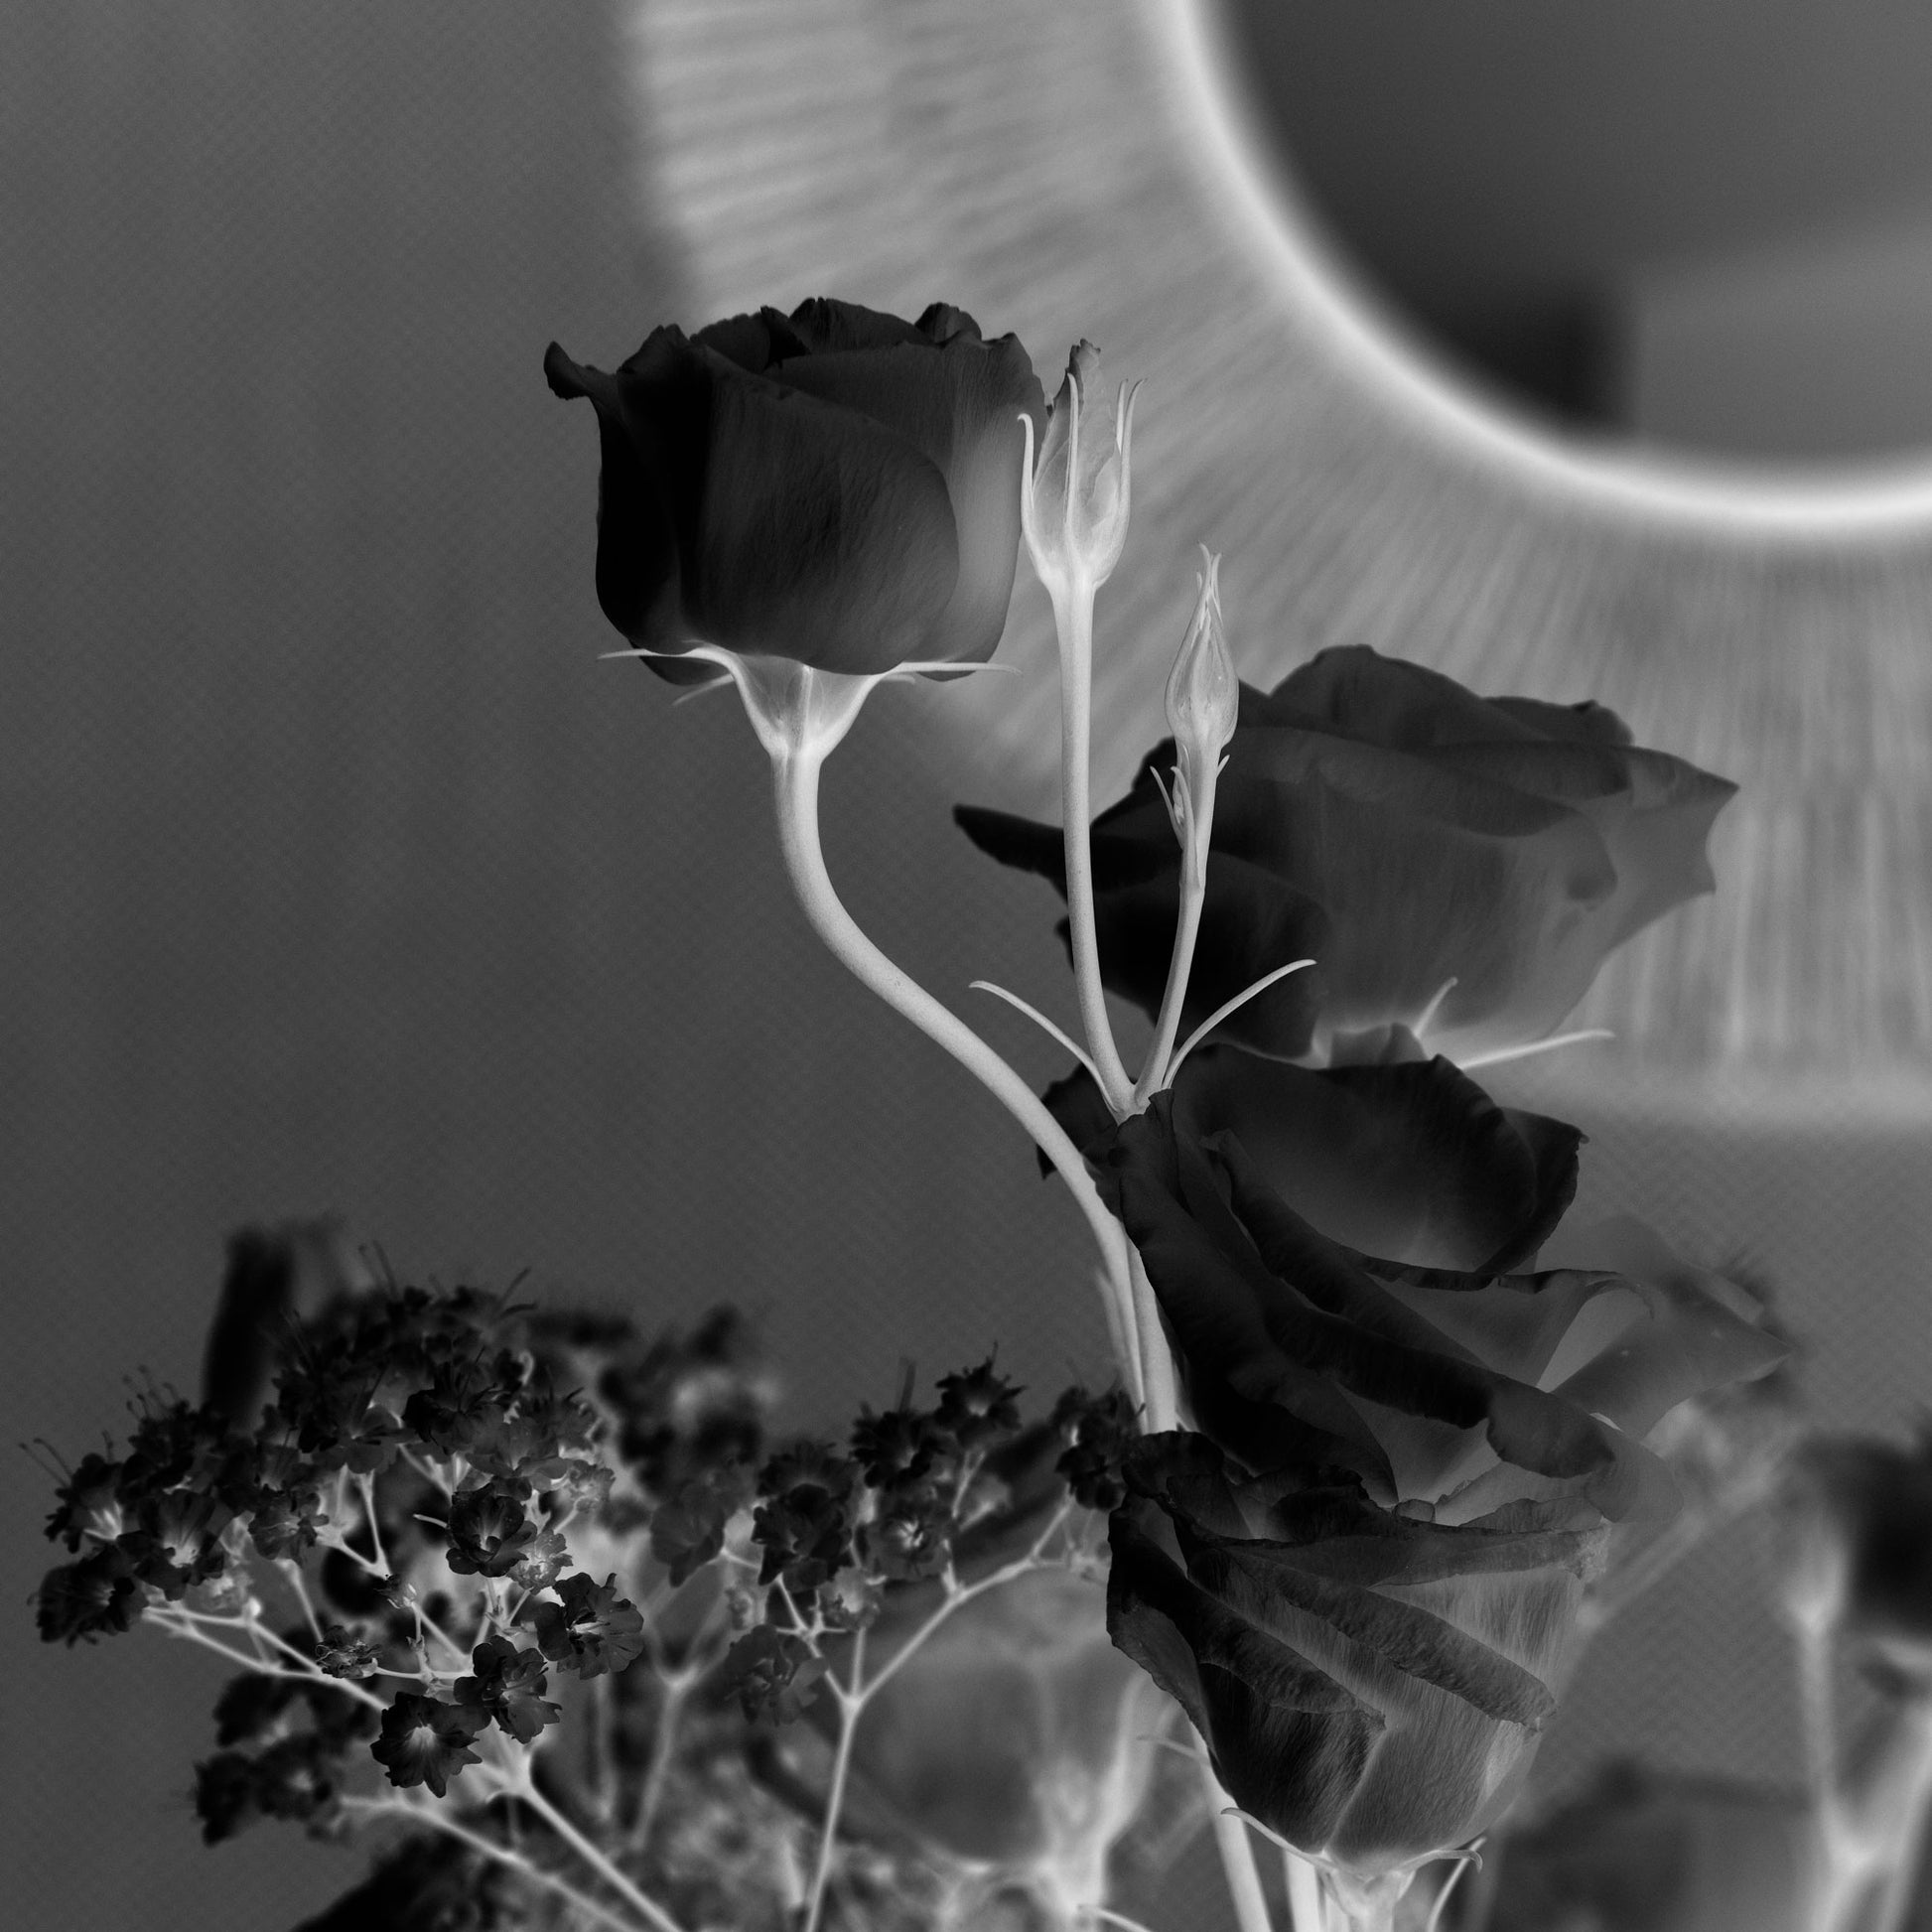 Digital inkjet negative by Hatter Editions. Still life photograph with flowers